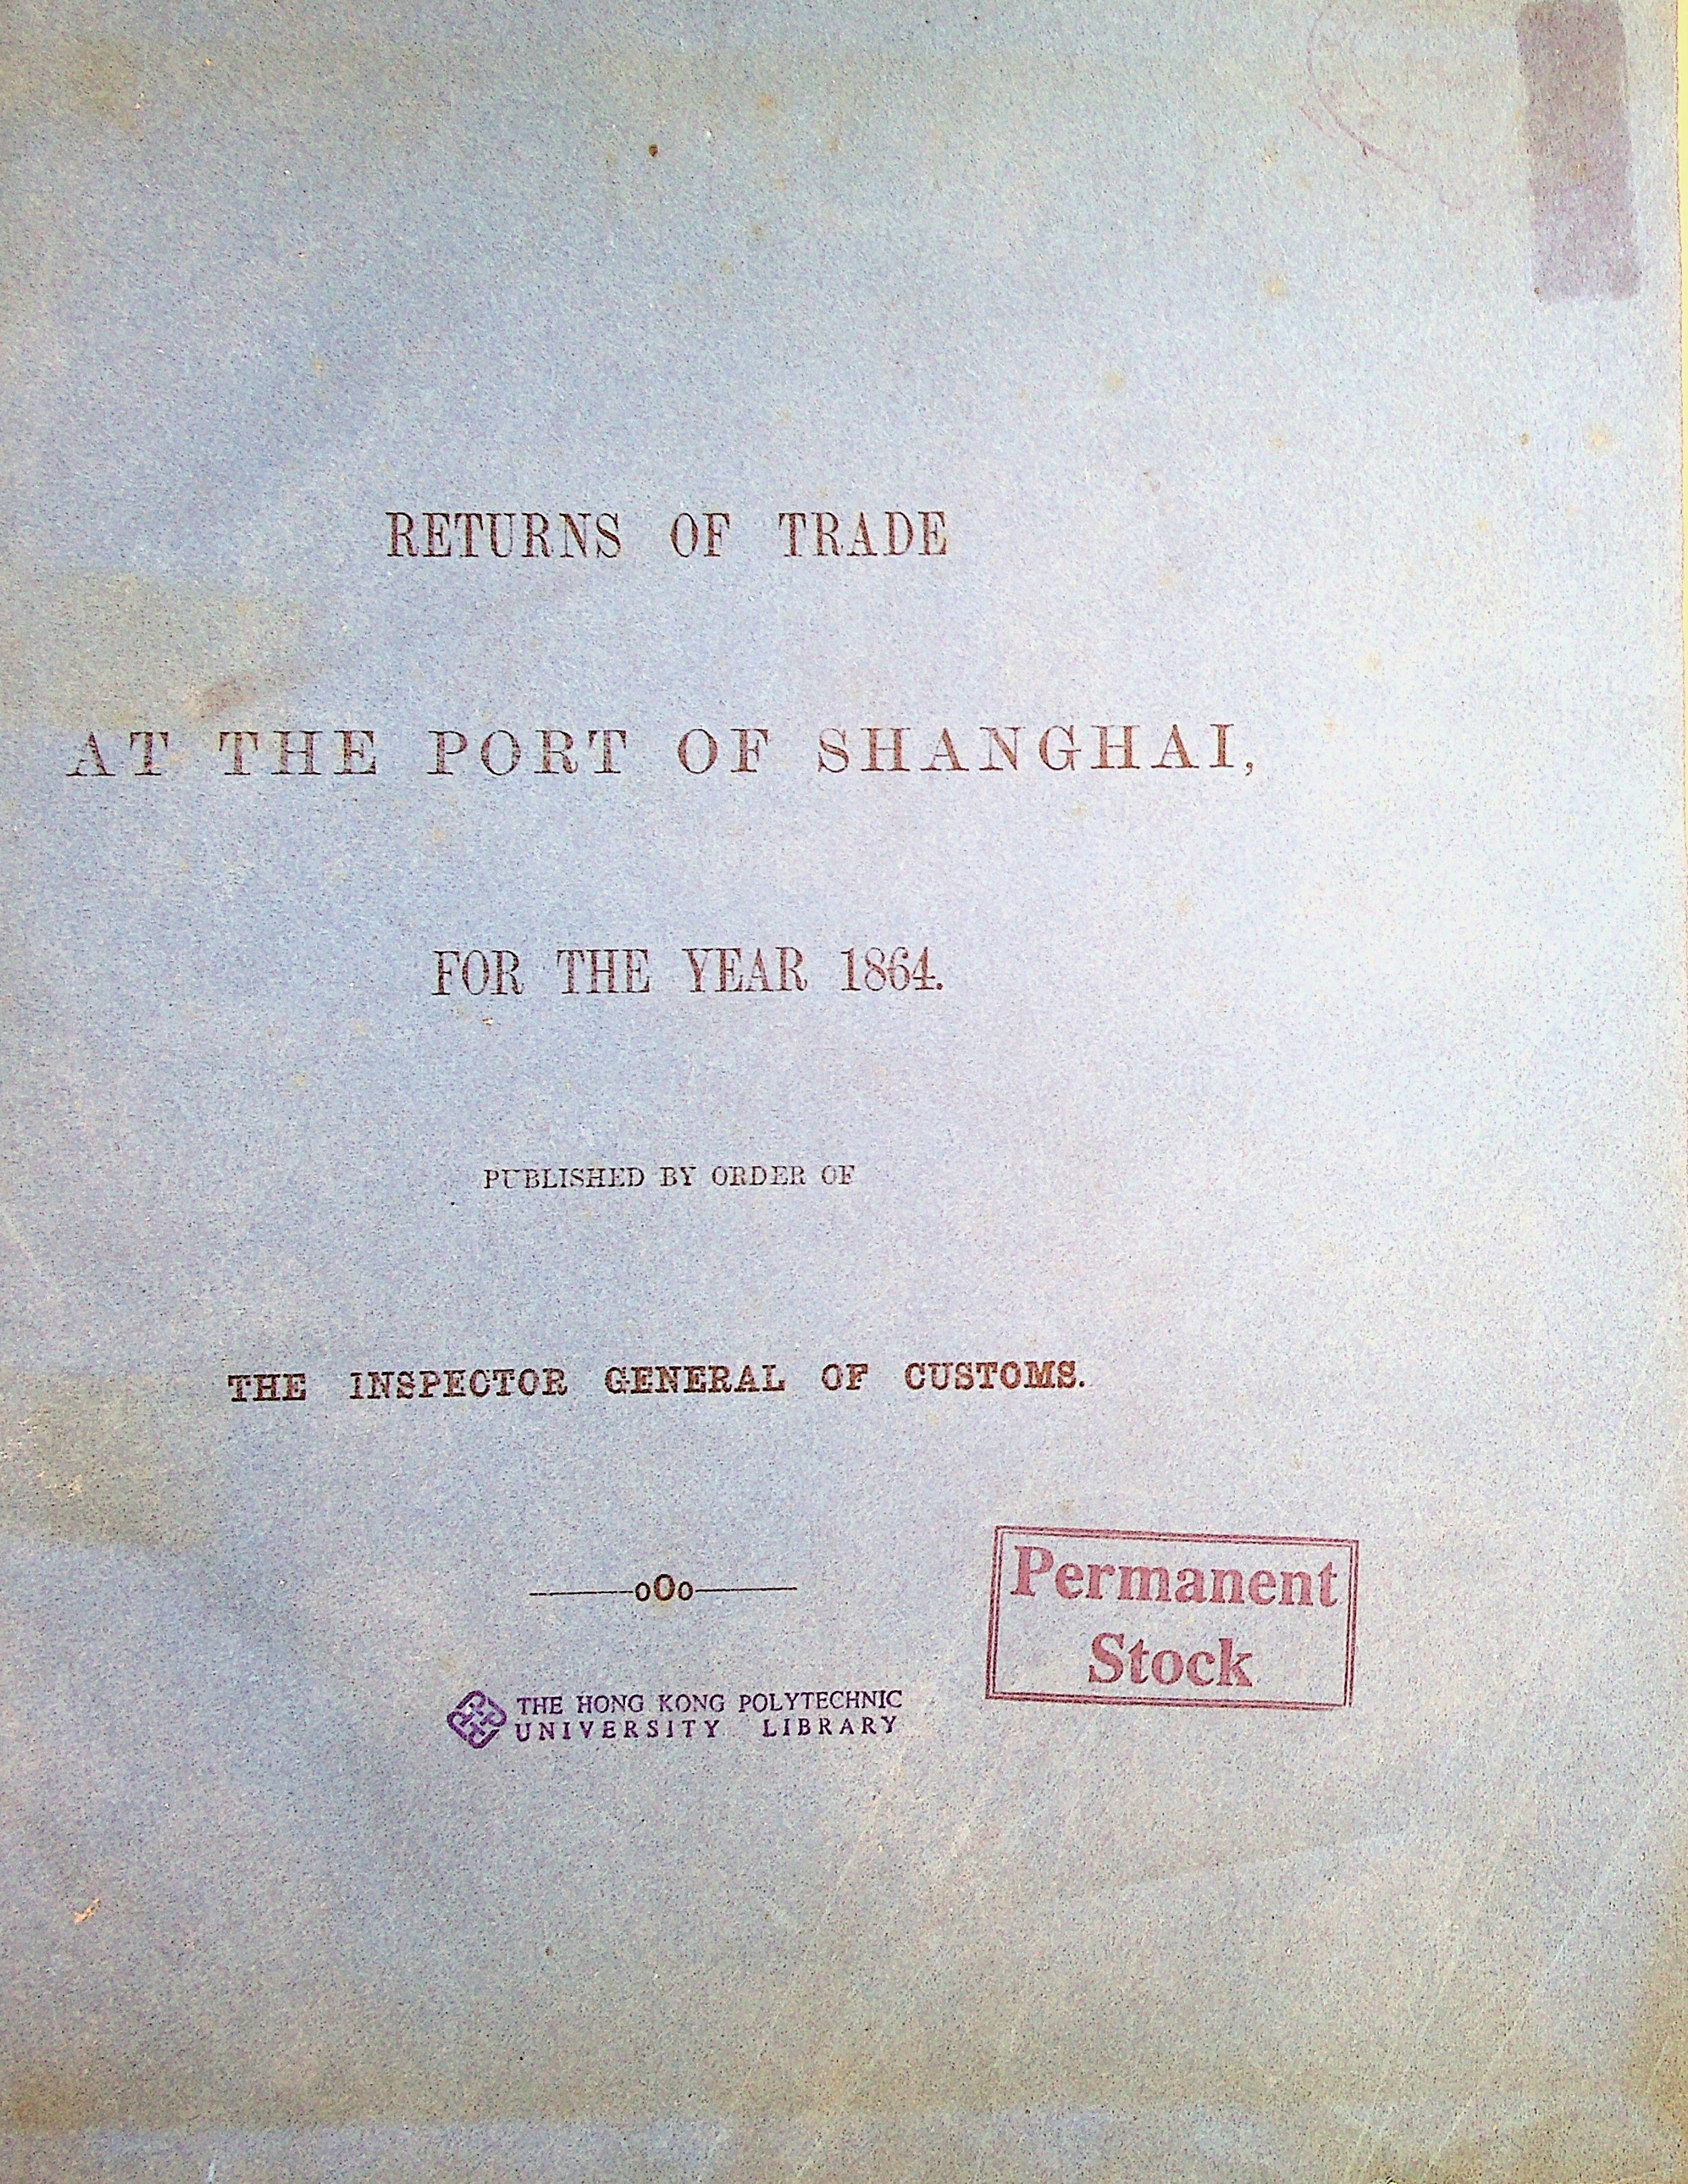 Returns of trade at the port of Shanghai, for the year 1864